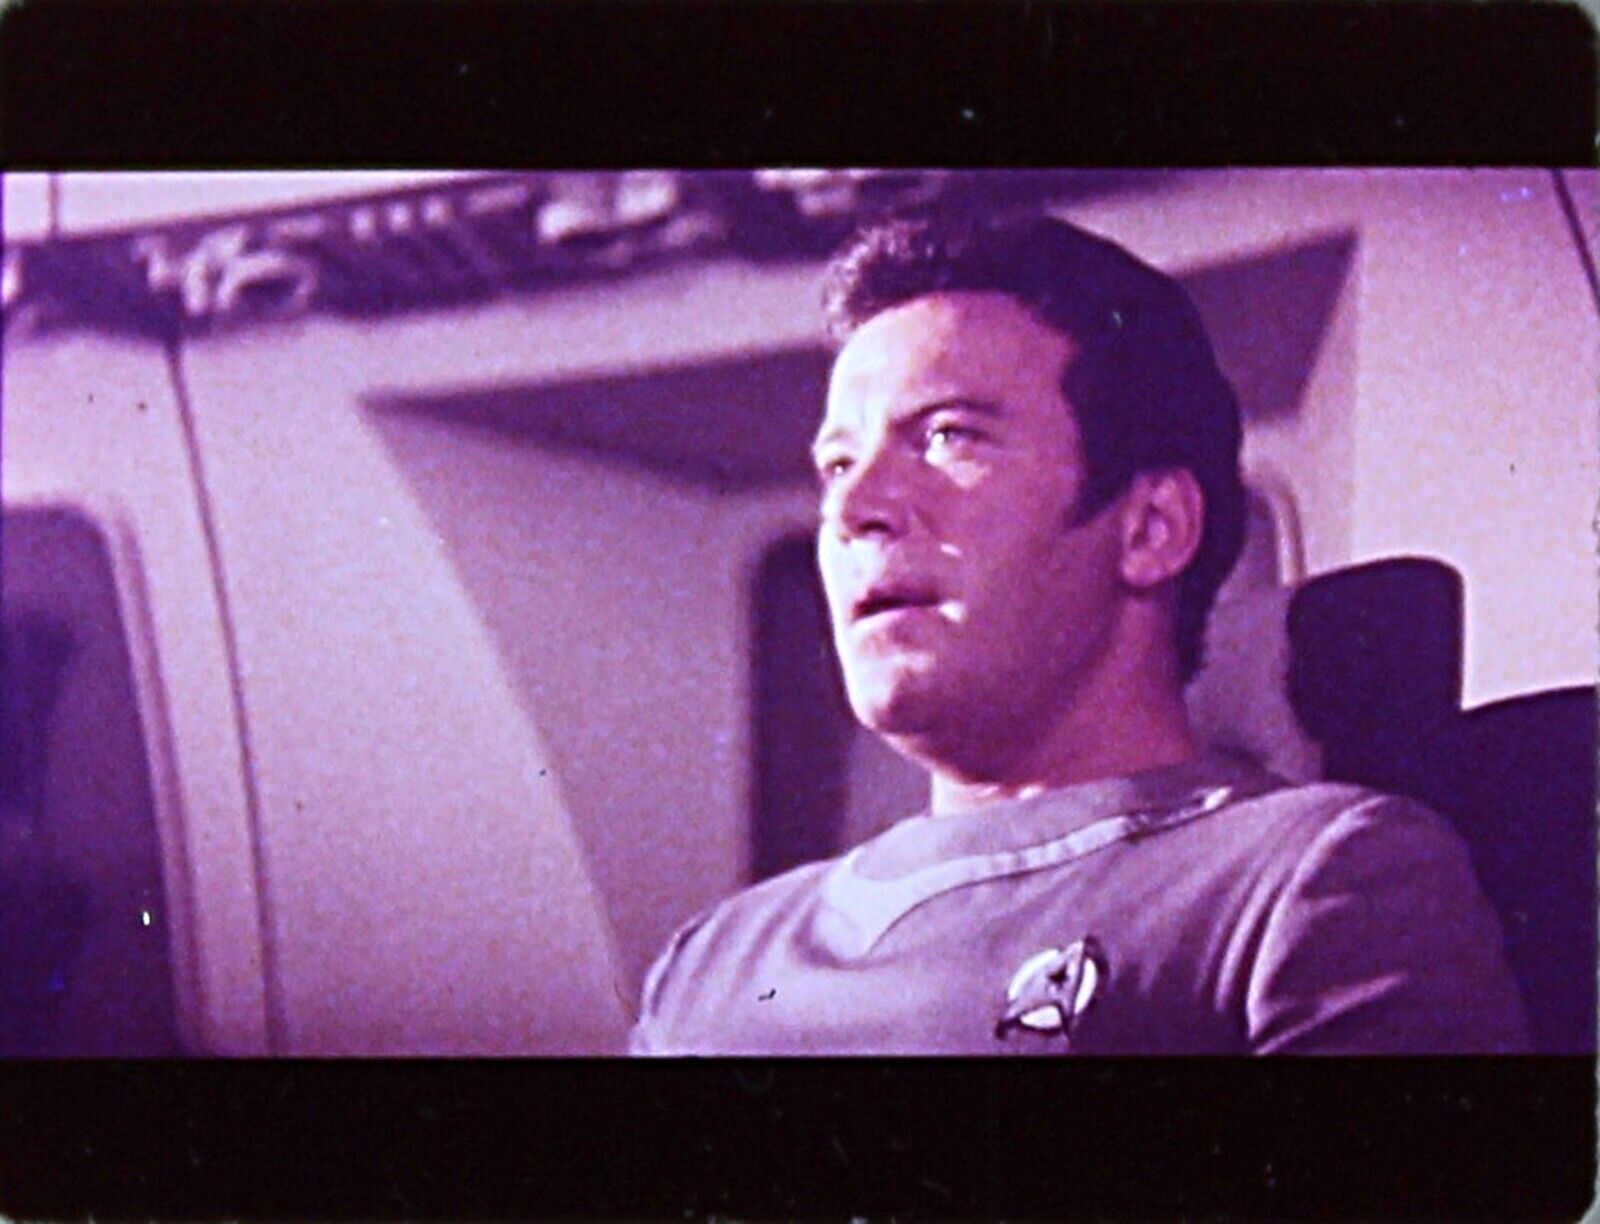 STAR TREK The Motion Picture 1979 35mm Movie Cell KIRK Mounted 2x2 Slide